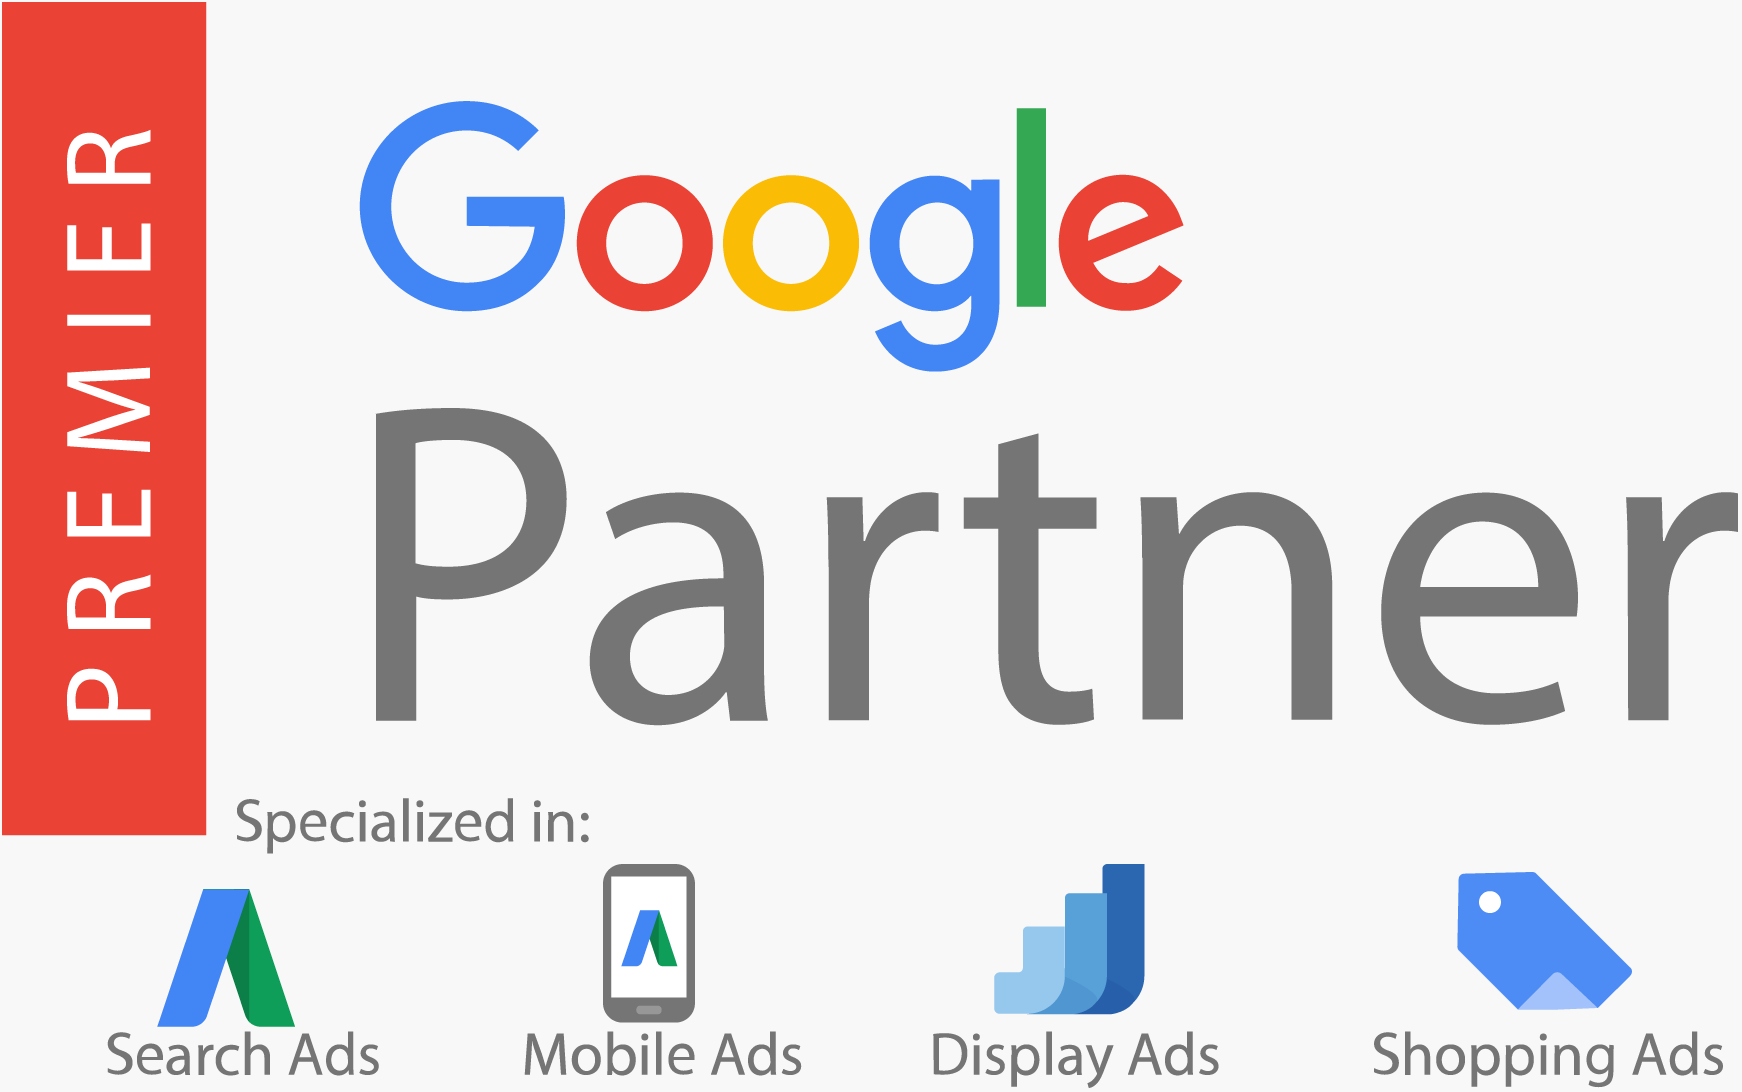 Certified Google Partner for Search Engine Optimization Services and PPC Management